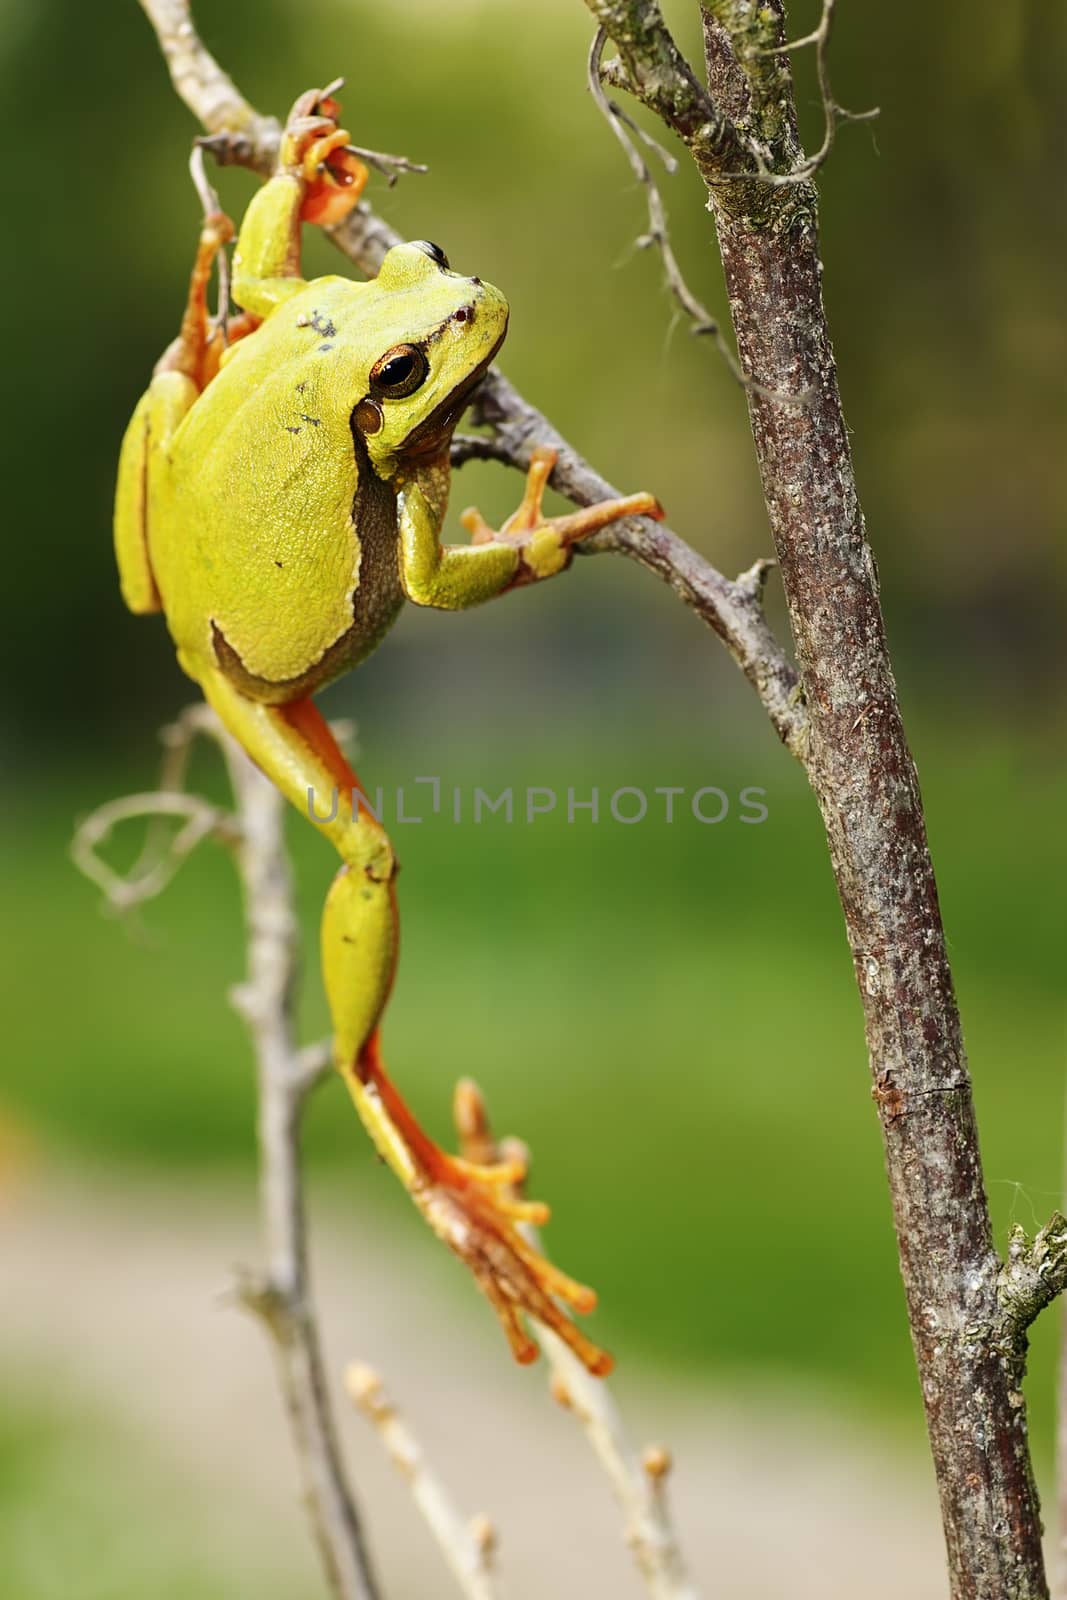 tree frog climbing on twigs by taviphoto